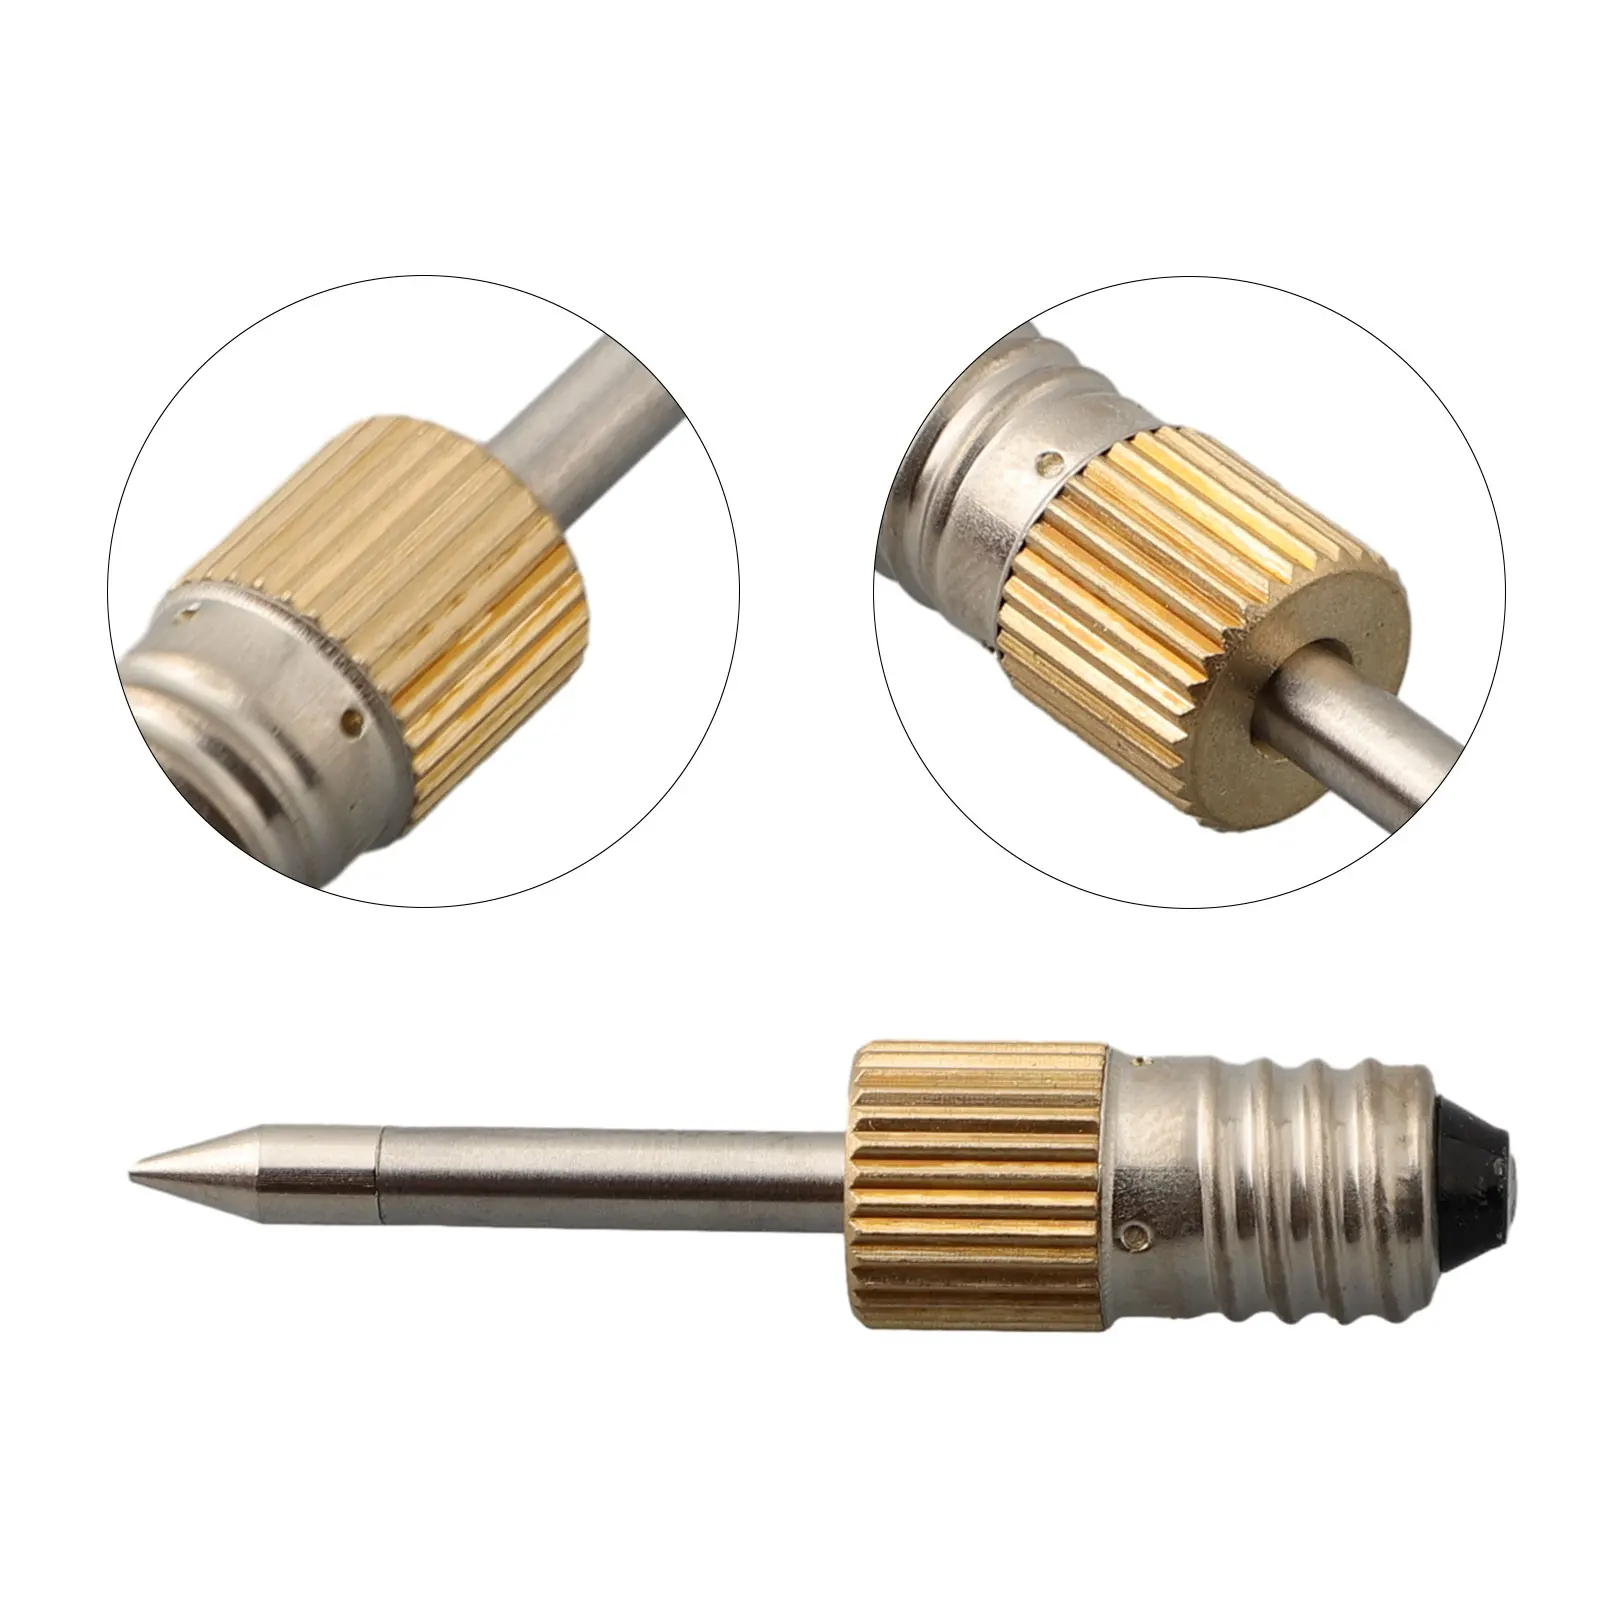 

1pc Soldering Tips Soldering Iron Head Replacement Soldering Iron Tips E10 Interface Electric Soldering Needle Tip For E10 Inter